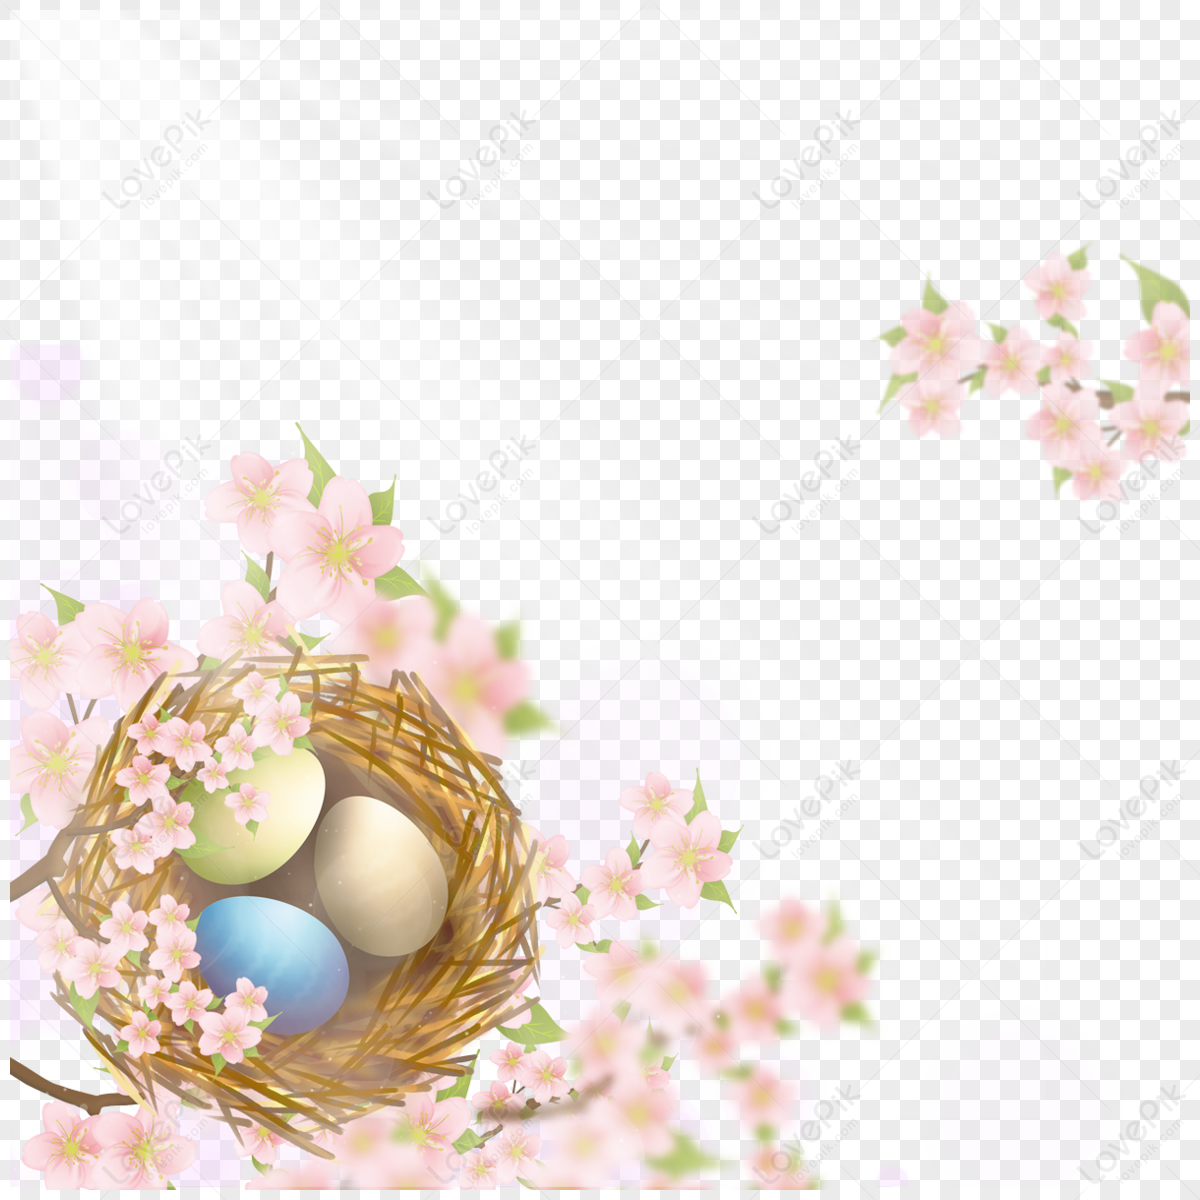 300+] Easter Wallpapers | Wallpapers.com